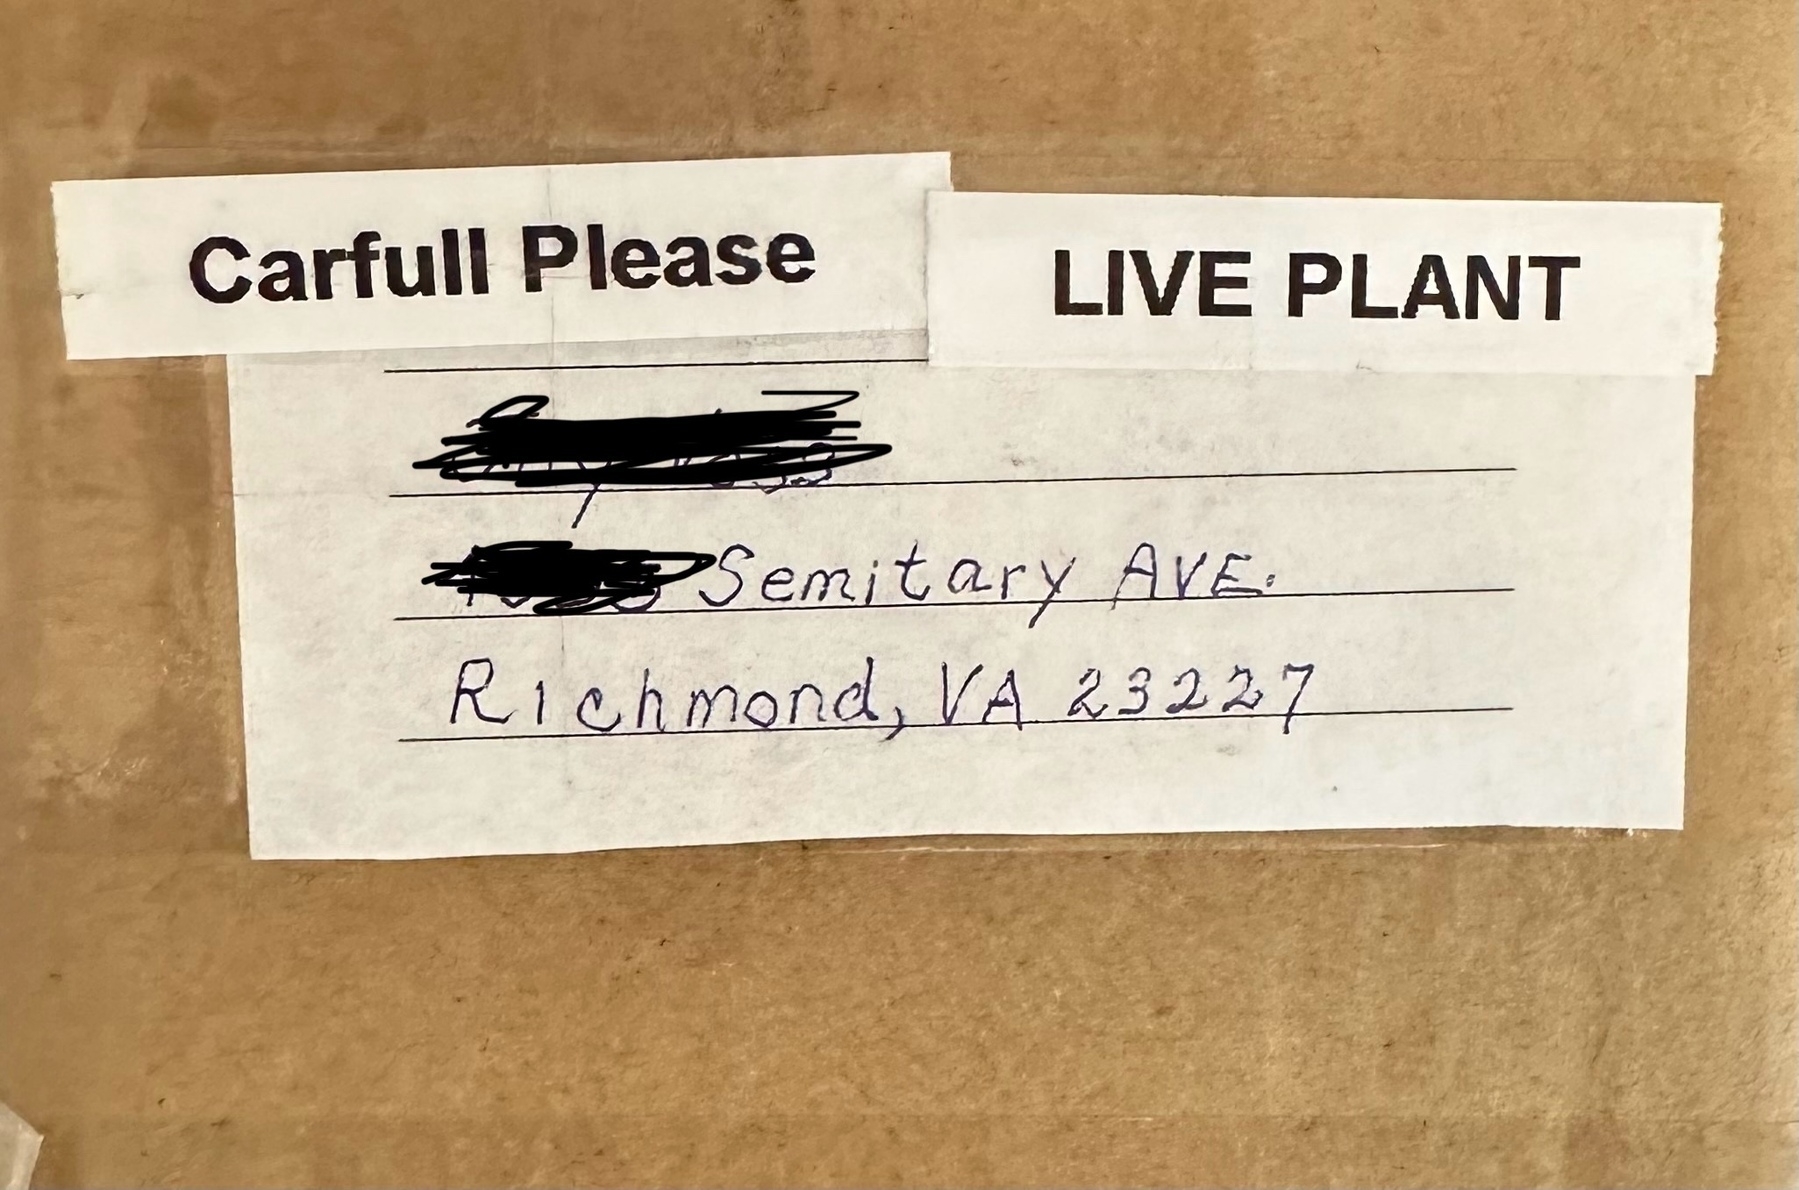 A package addressed to “Semitary Avenue” with a warning affixed reading “CARFULL PLEASE LIVE PLANT”